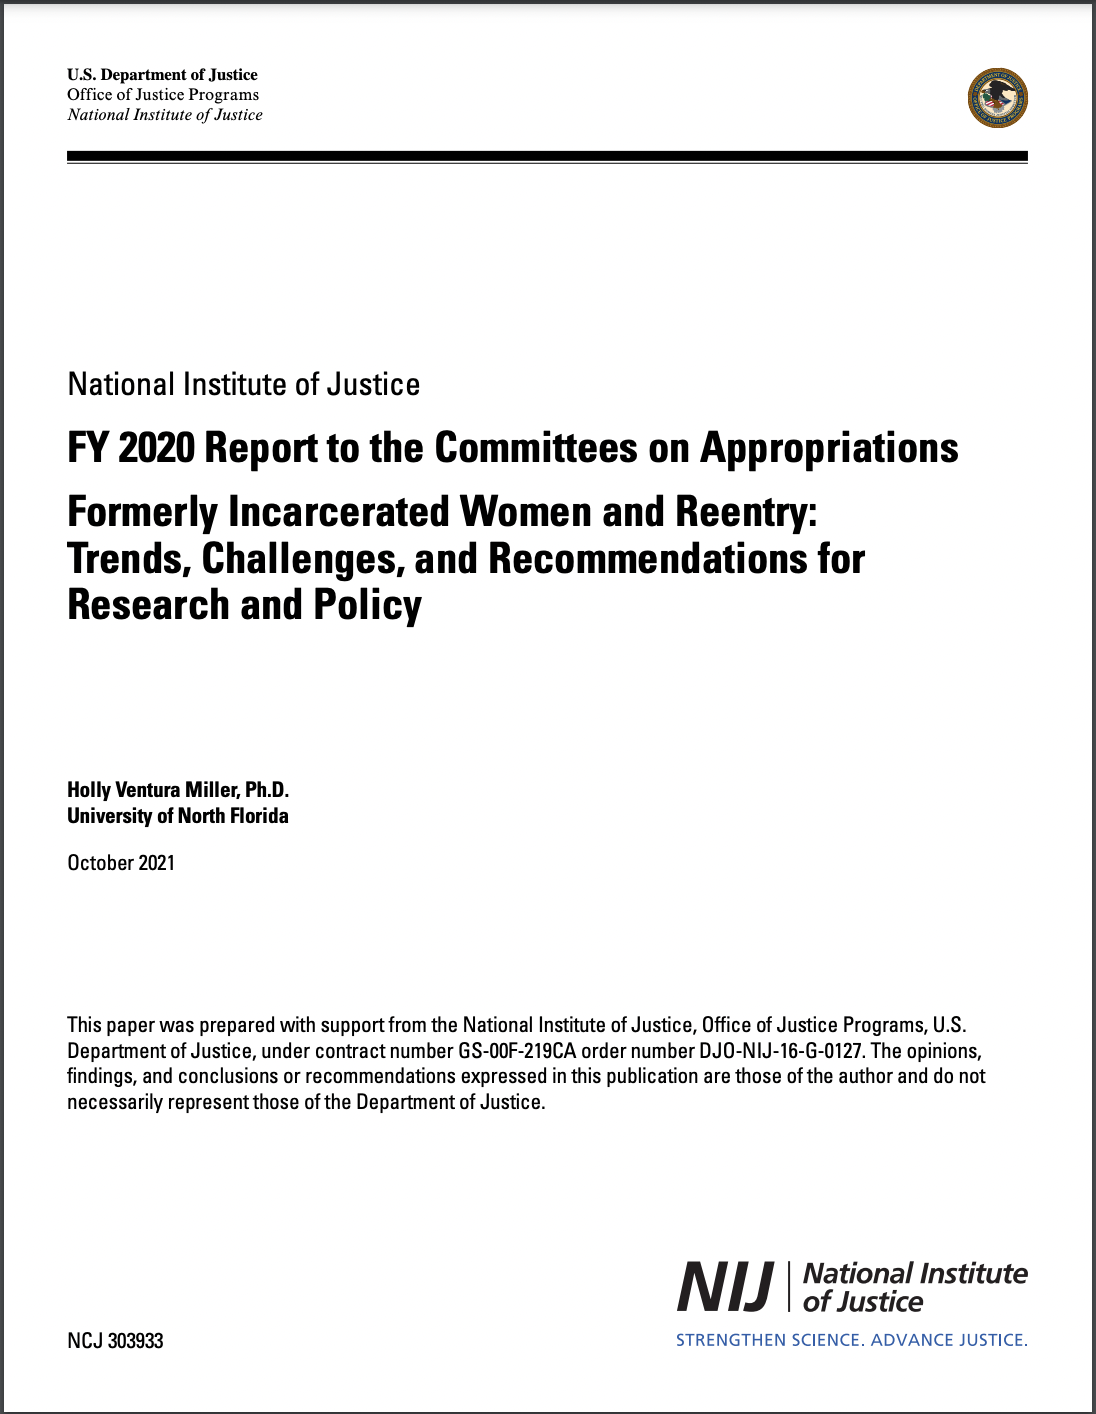 Women Reentry report cover image